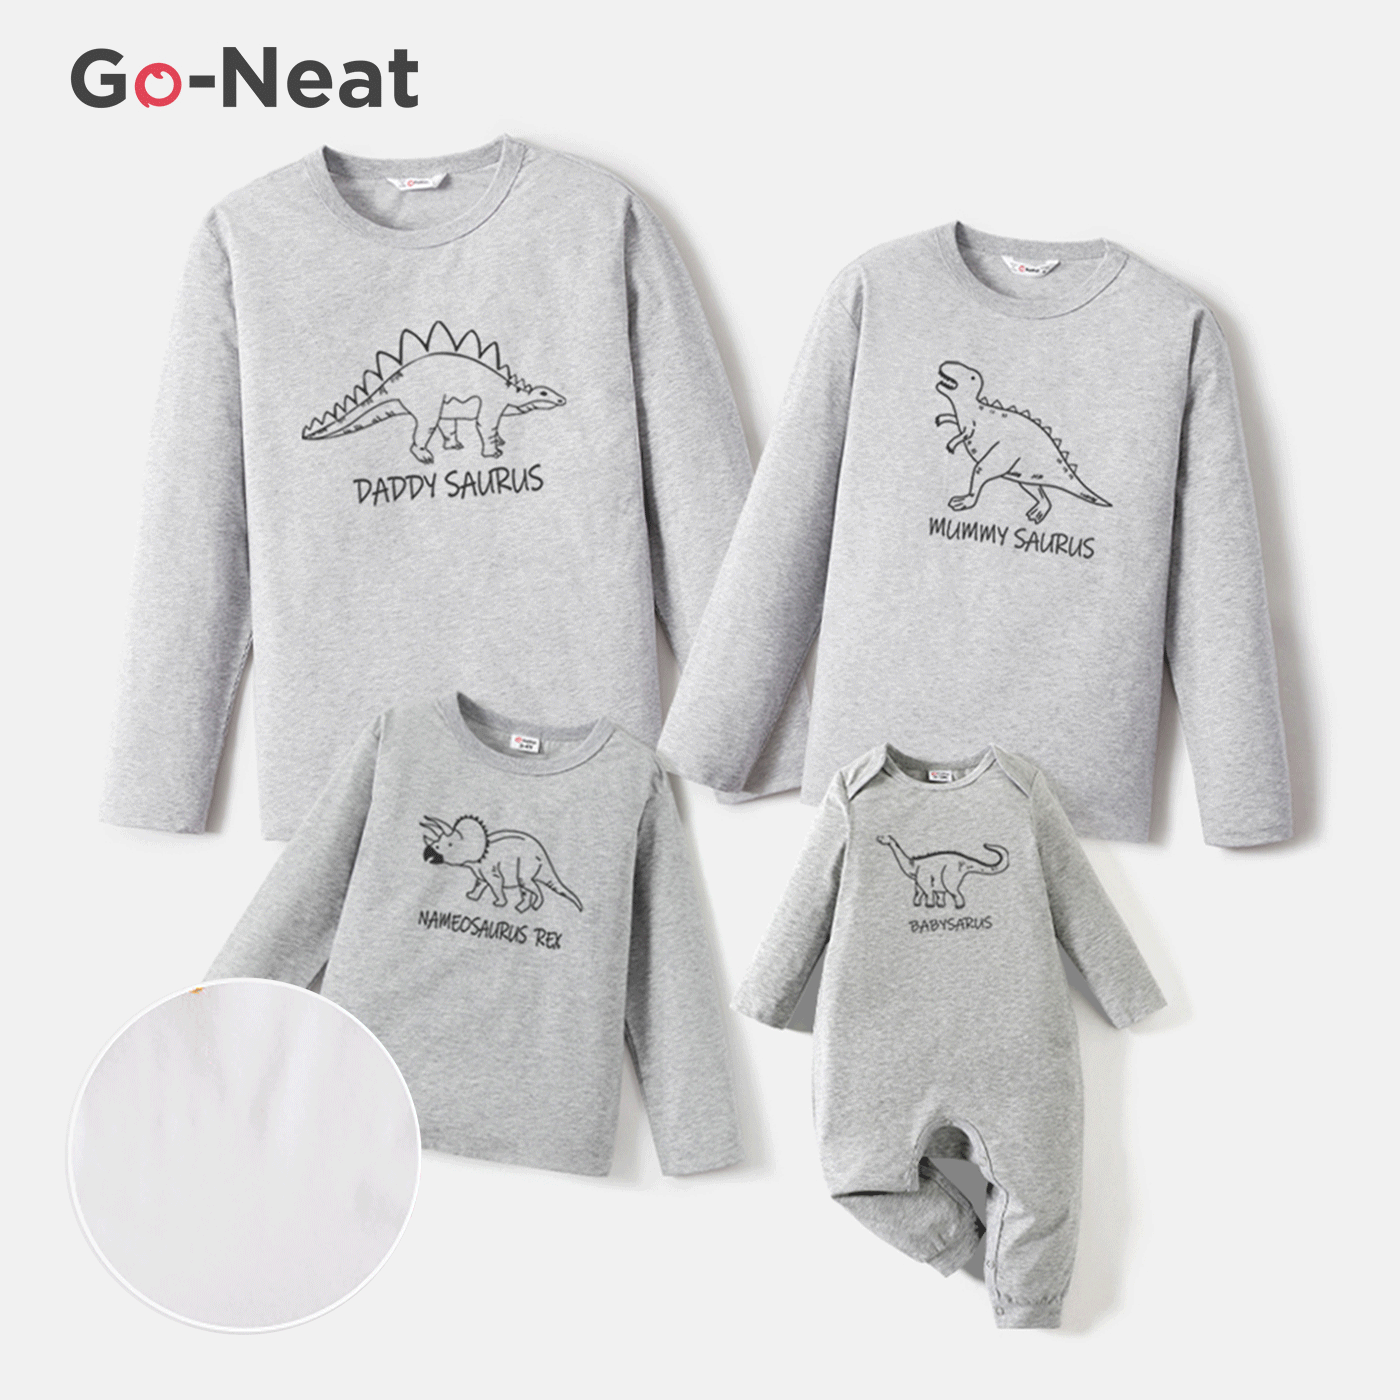 Go-Neat Water Repellent and Stain Resistant Family Matching Dinosaur & Letter Print Long-sleeve Tee Light Grey